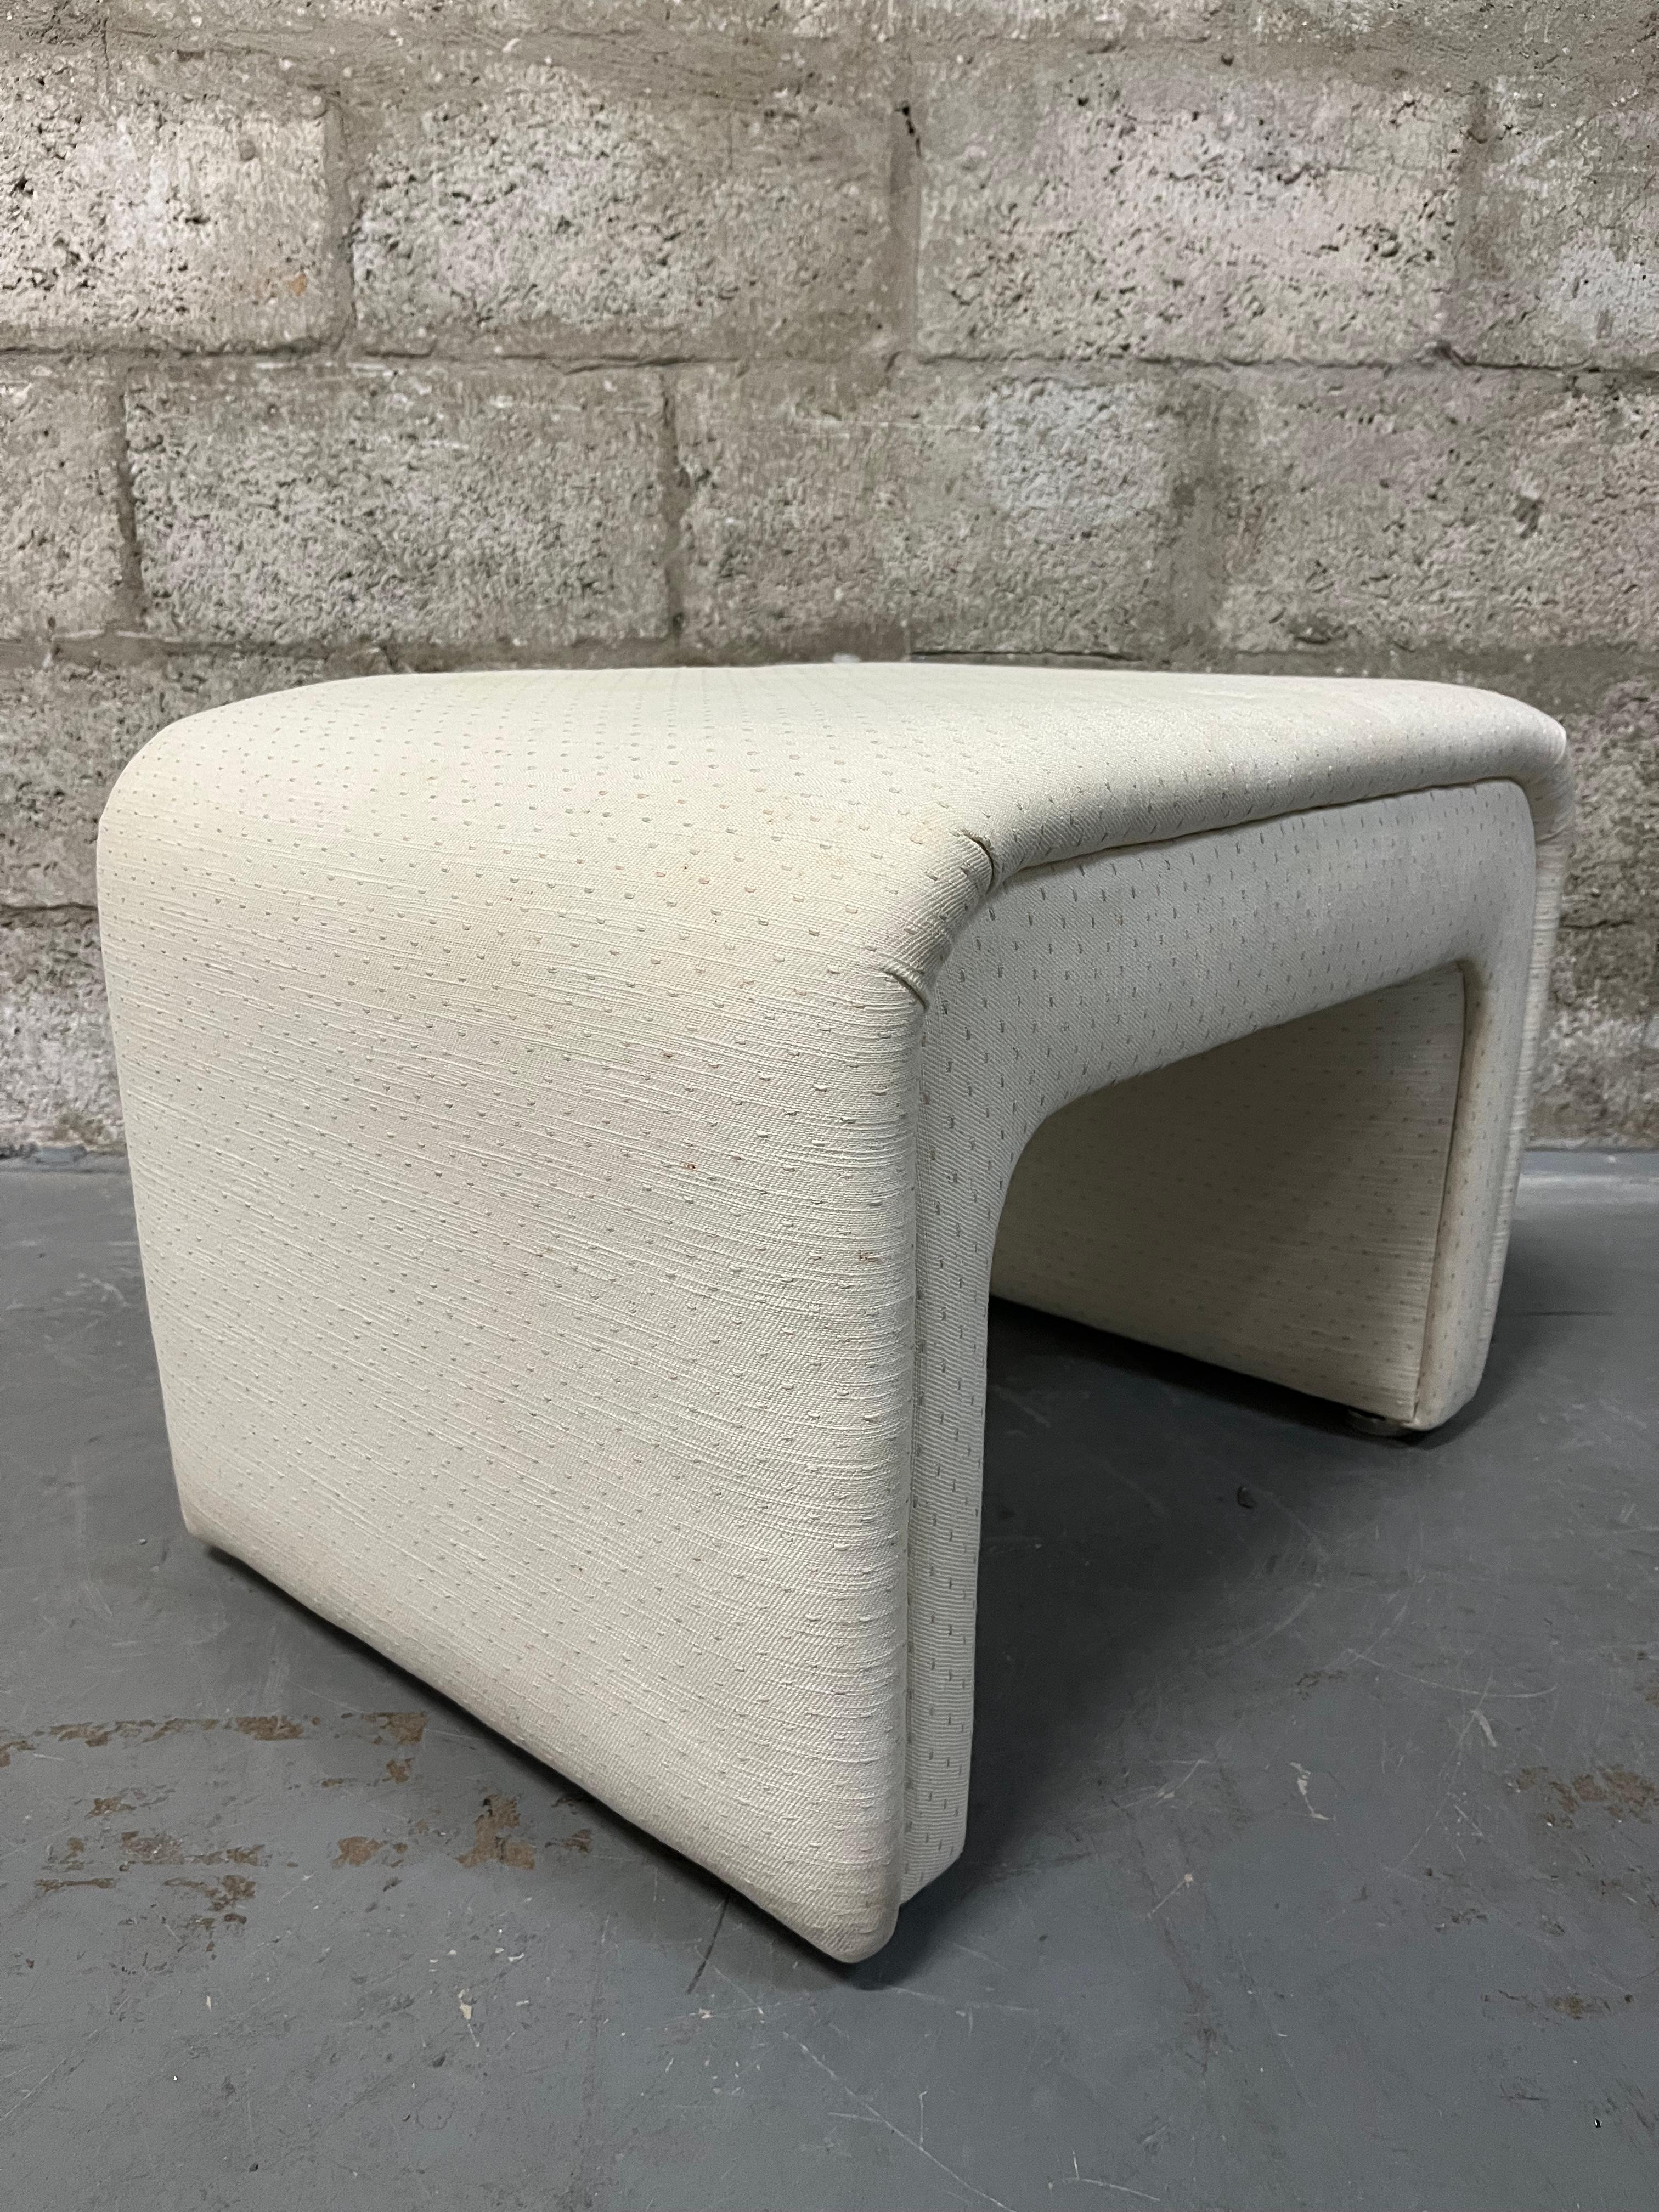 Late 20th Century Art Deco Revival Upholstered Waterfall Bench by Thayer Coggin. Circa 1980s  For Sale